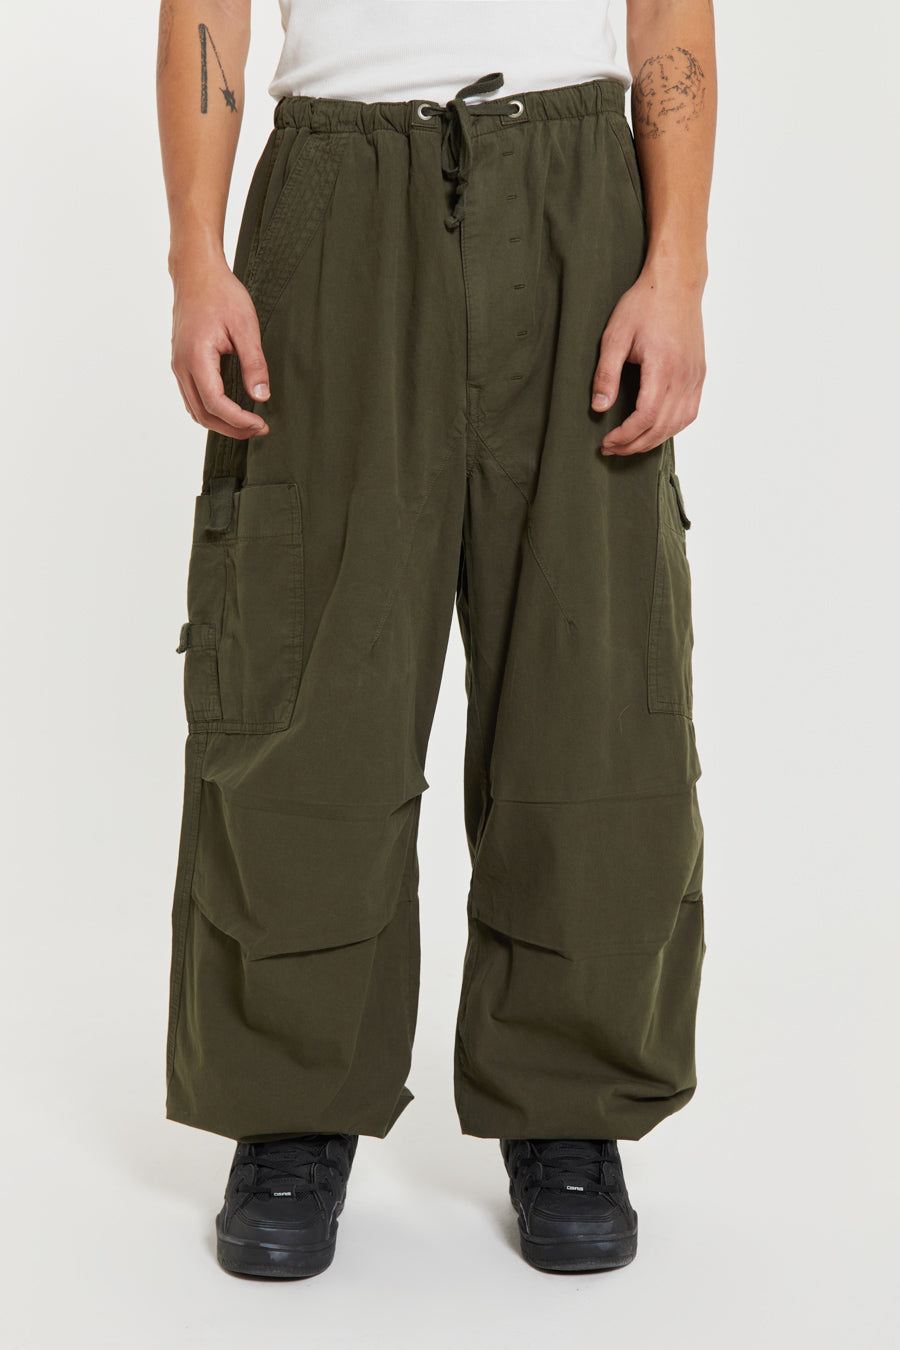 Olive Green Cargo Parachute Pants